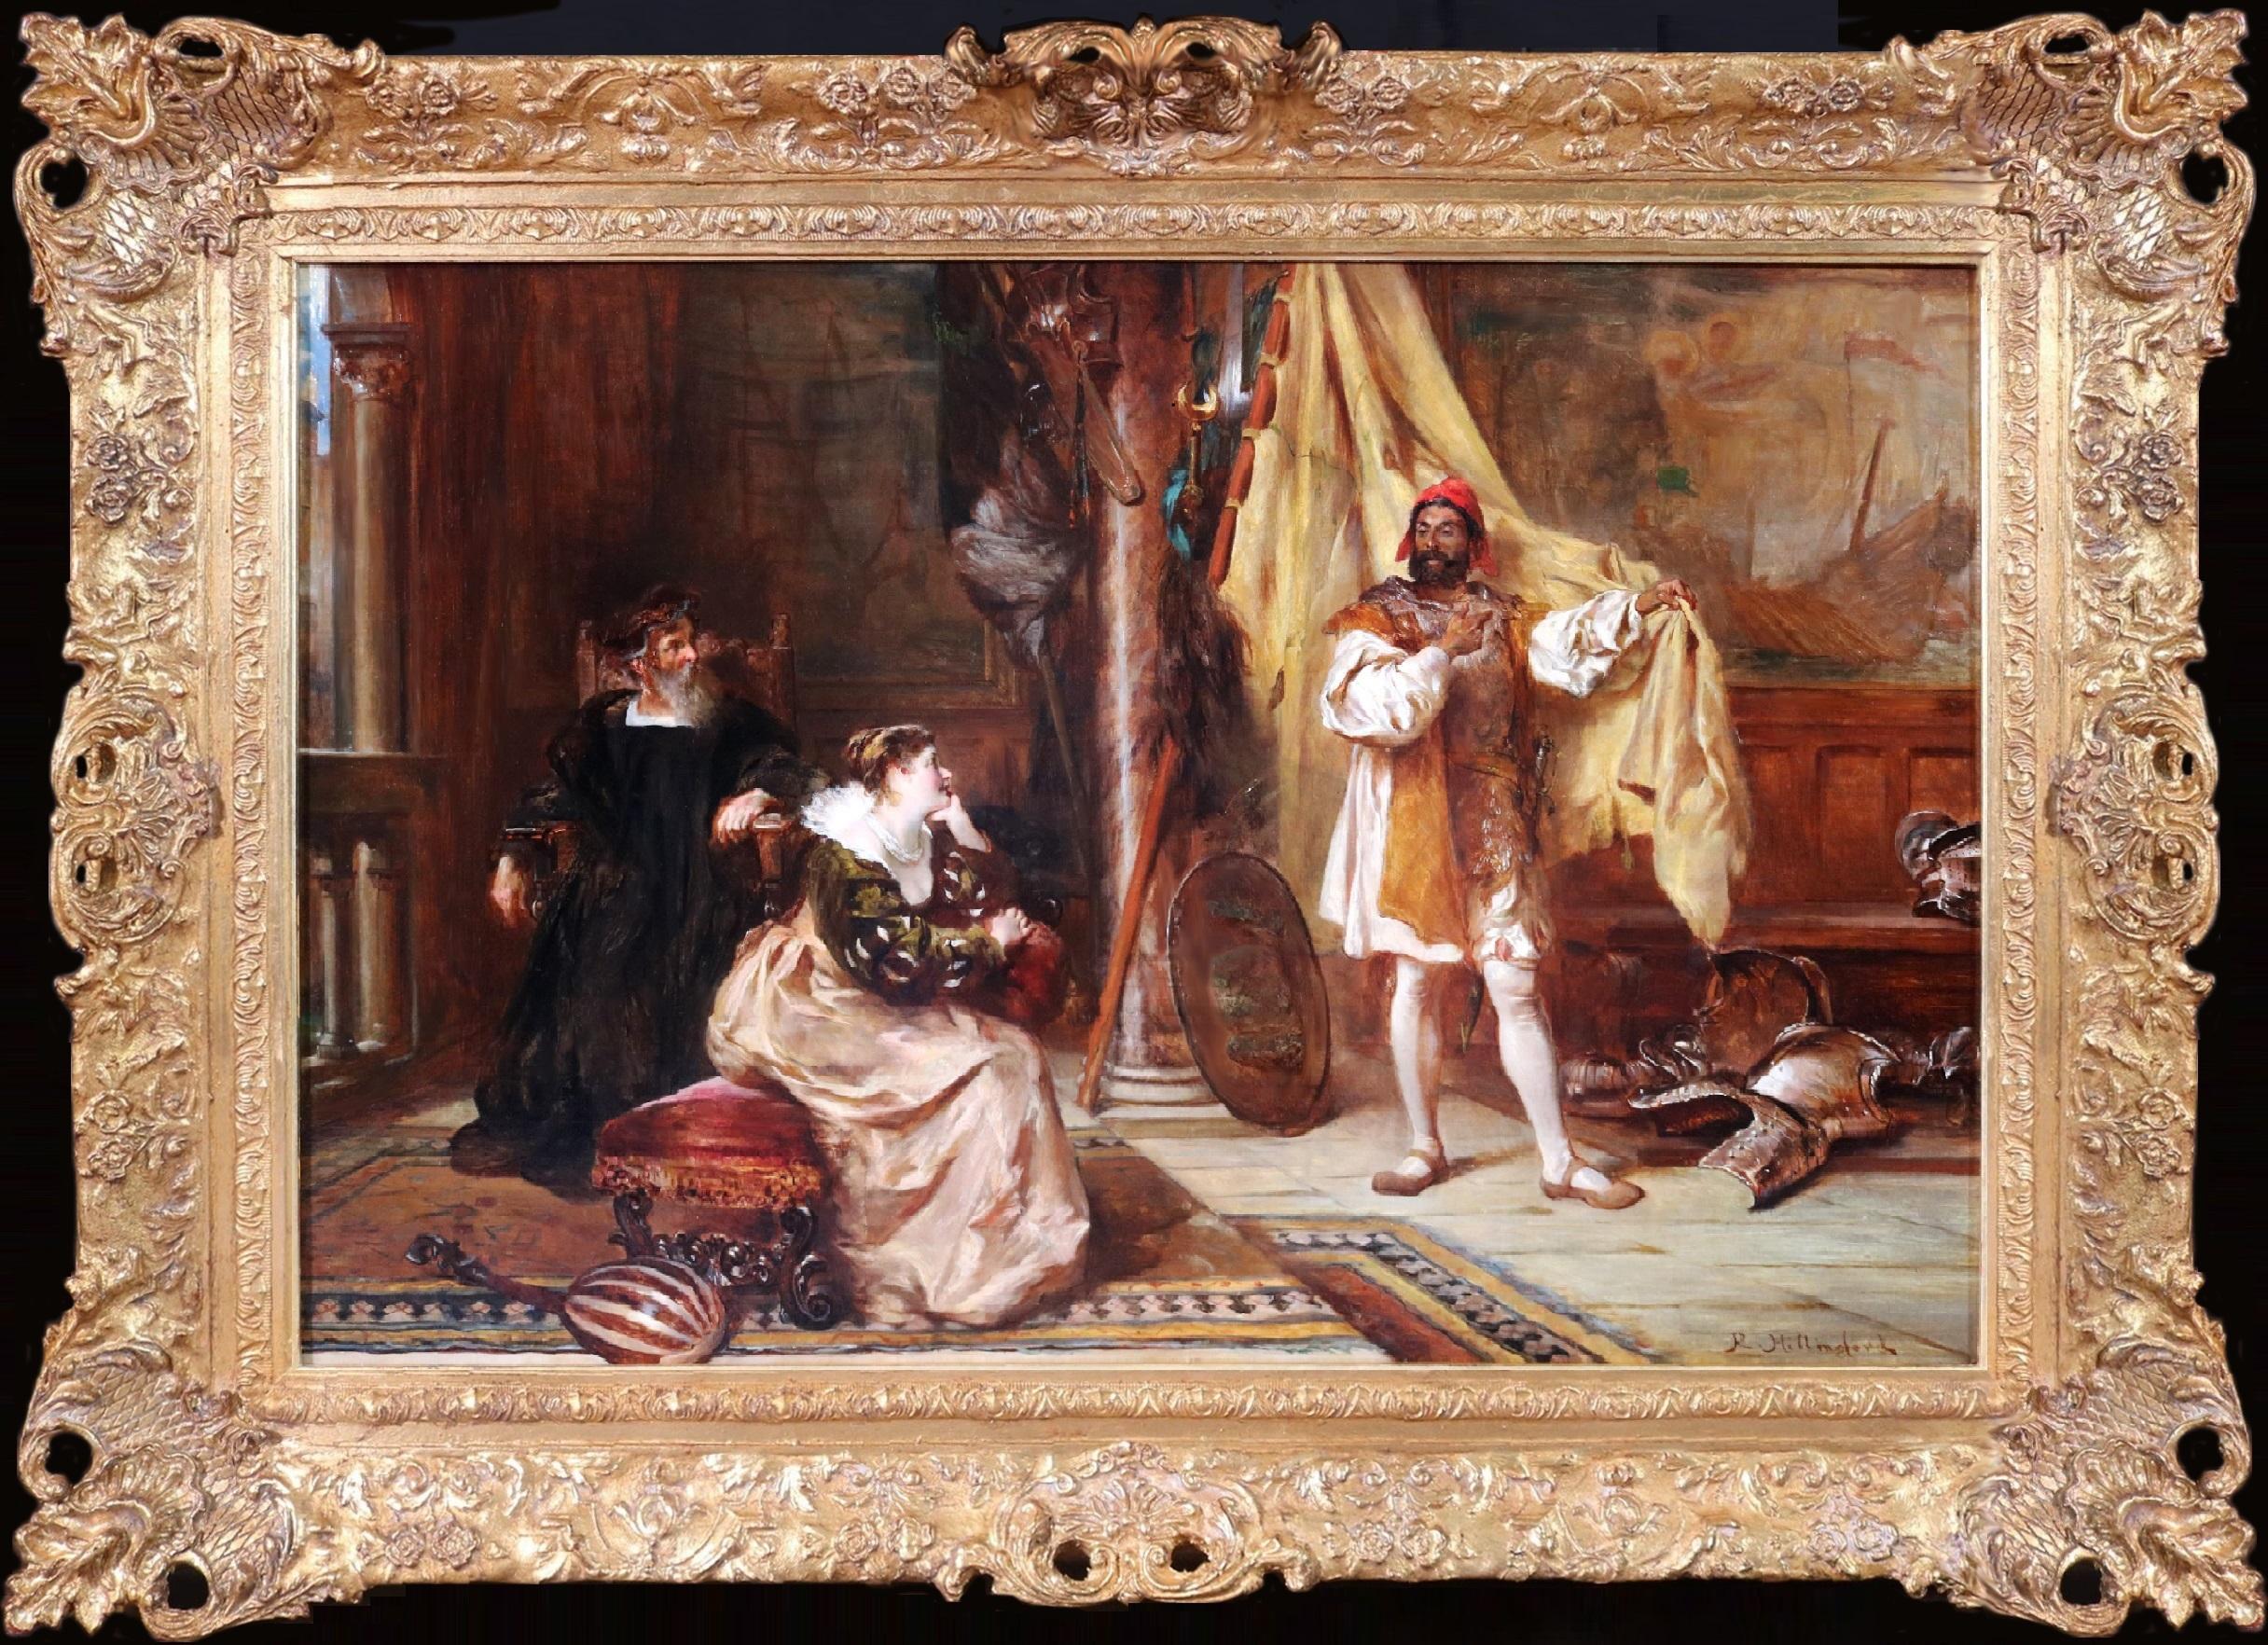 ‘Othello recounting his adventures to Desdemona and Brabantio’ by Robert Alexander Hillingford (1828-1904). 

The painting – which depicts Shakespeare’s Venetian general, his lover Desdemona, and her senator father – is signed by the artist and